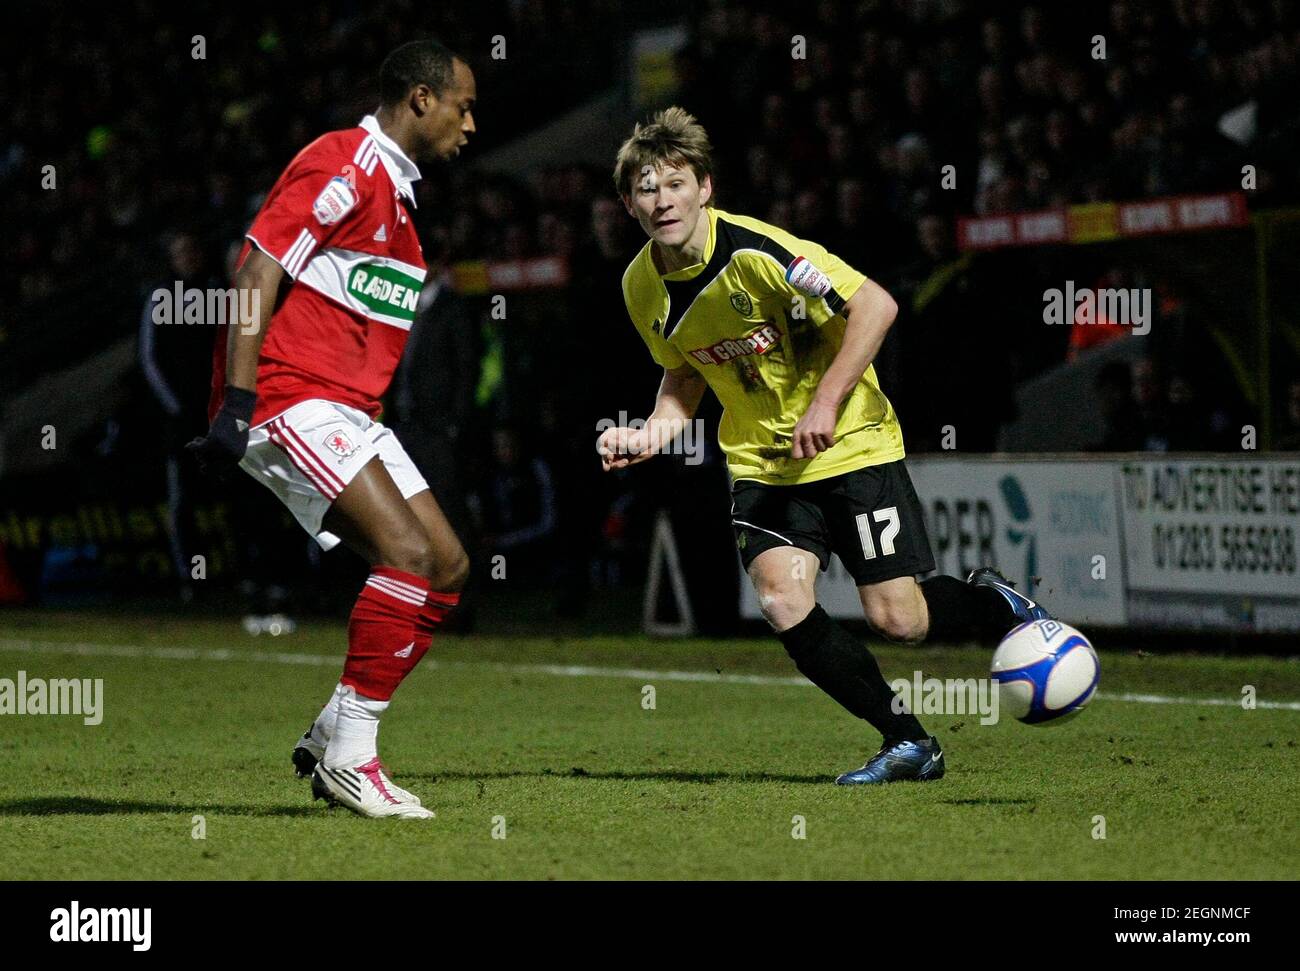 Football - Burton Albion v Middlesbrough - FA Cup Third Round - The Pirelli  Stadium - 10/11 - 8/1/11 Jimmy Phillips - Burton Albion in action Mandatory  Credit: Action Images / Andrew Boyers Stock Photo - Alamy